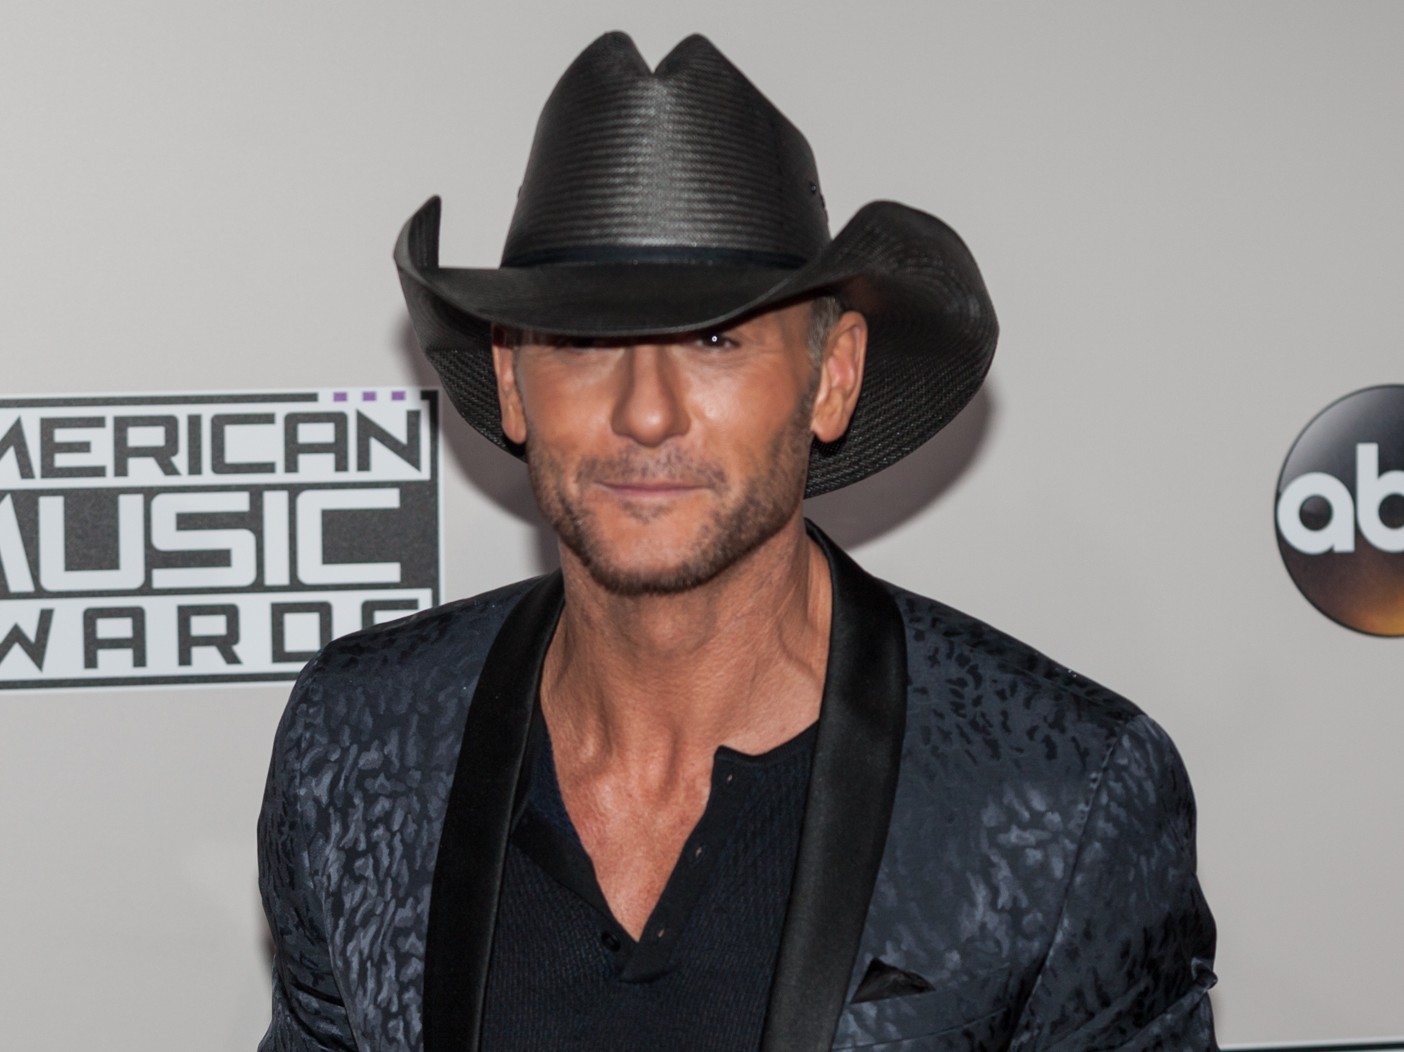 The Exercises Tim McGraw Avoids Following Surgeries, Health Difficulties